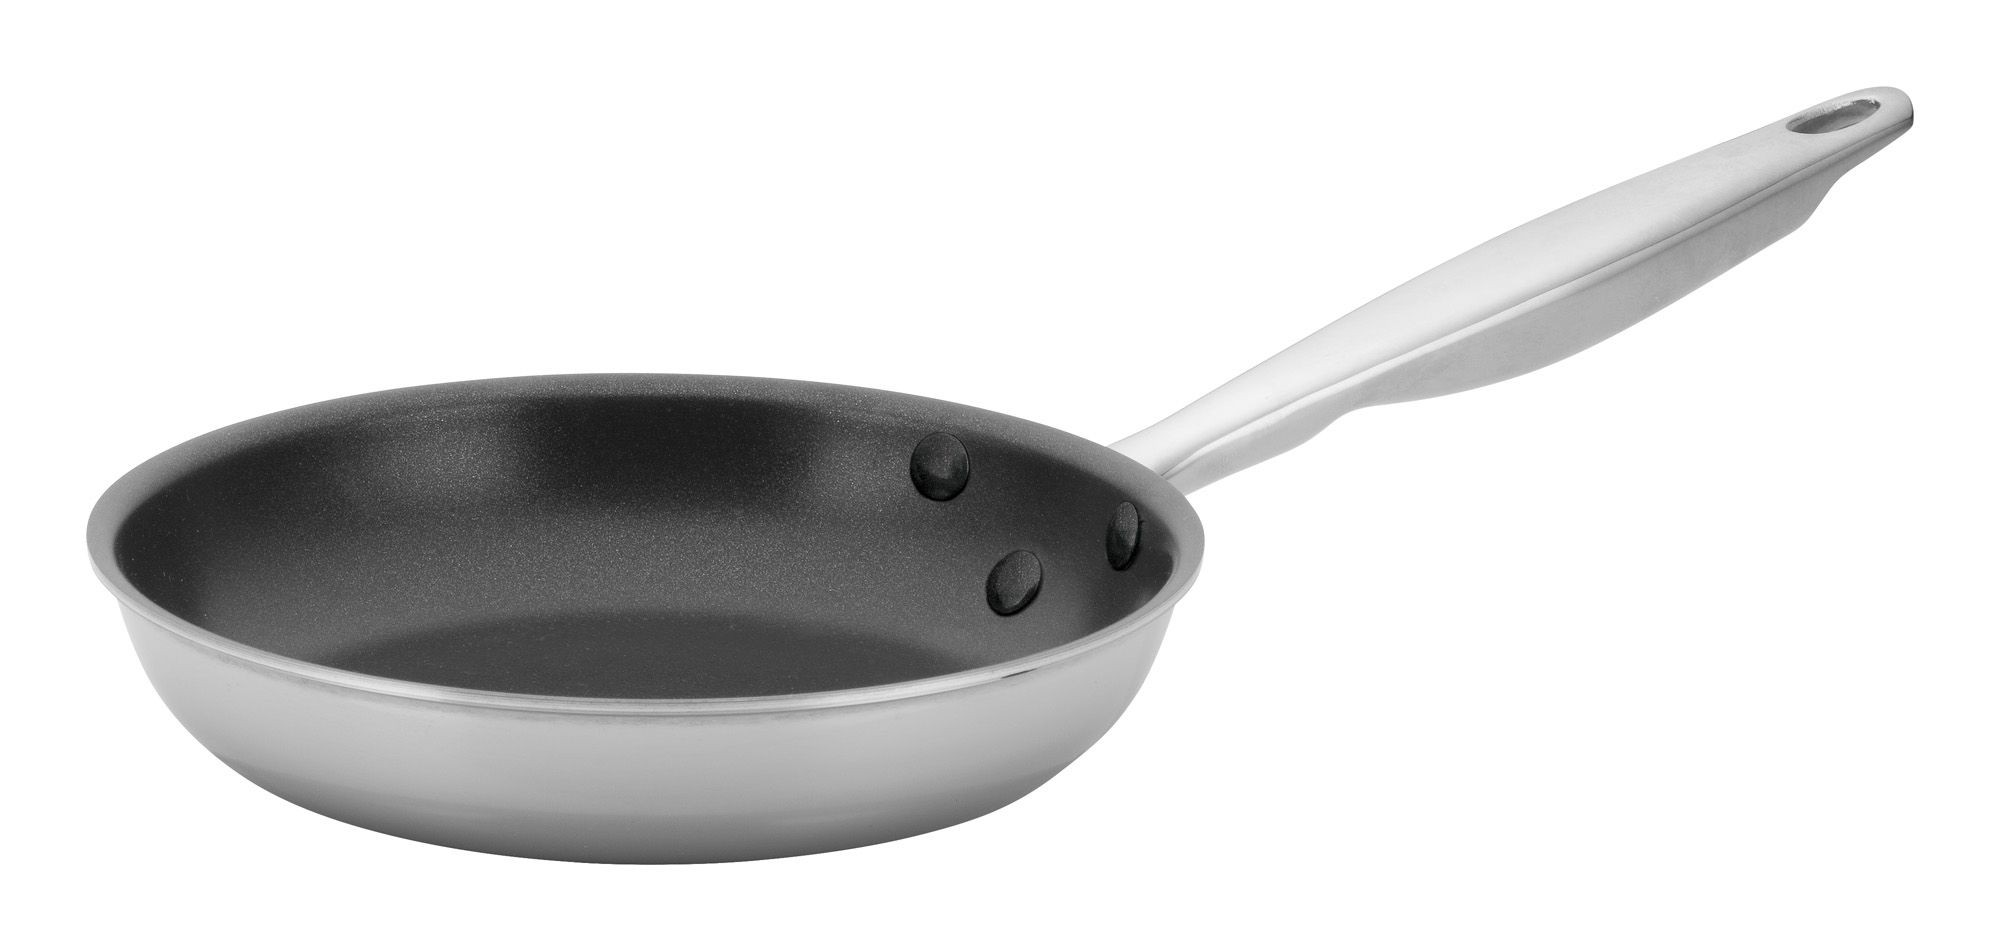 Winco TGFP-7NS Tri-Ply Excalibur Stainless Steel Non-Stick 7" Fry Pan